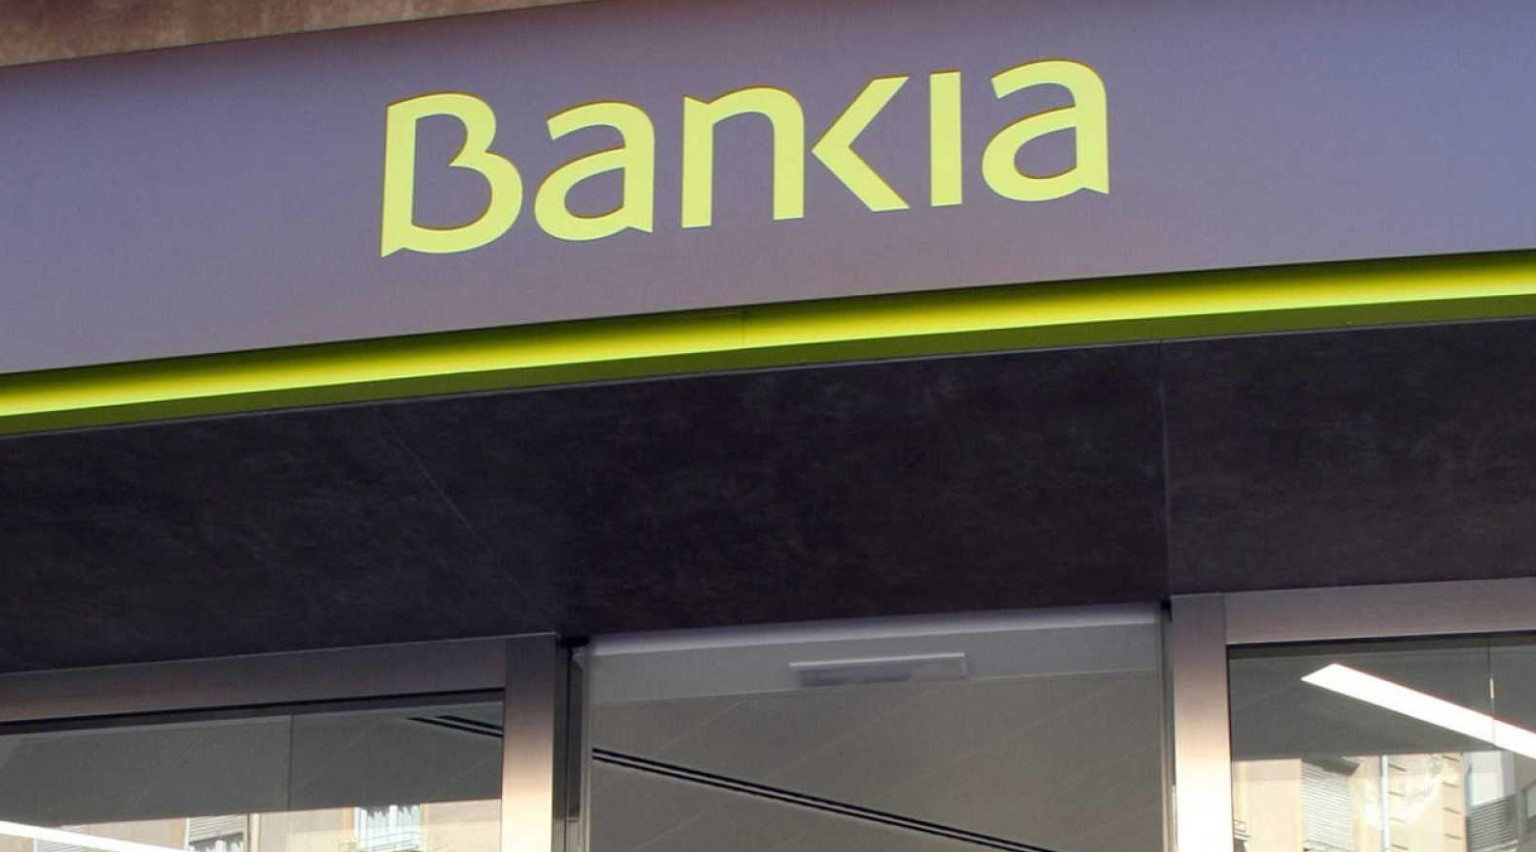 BANKIA CUSTOMER SERVICE: CONTACT NUMBER